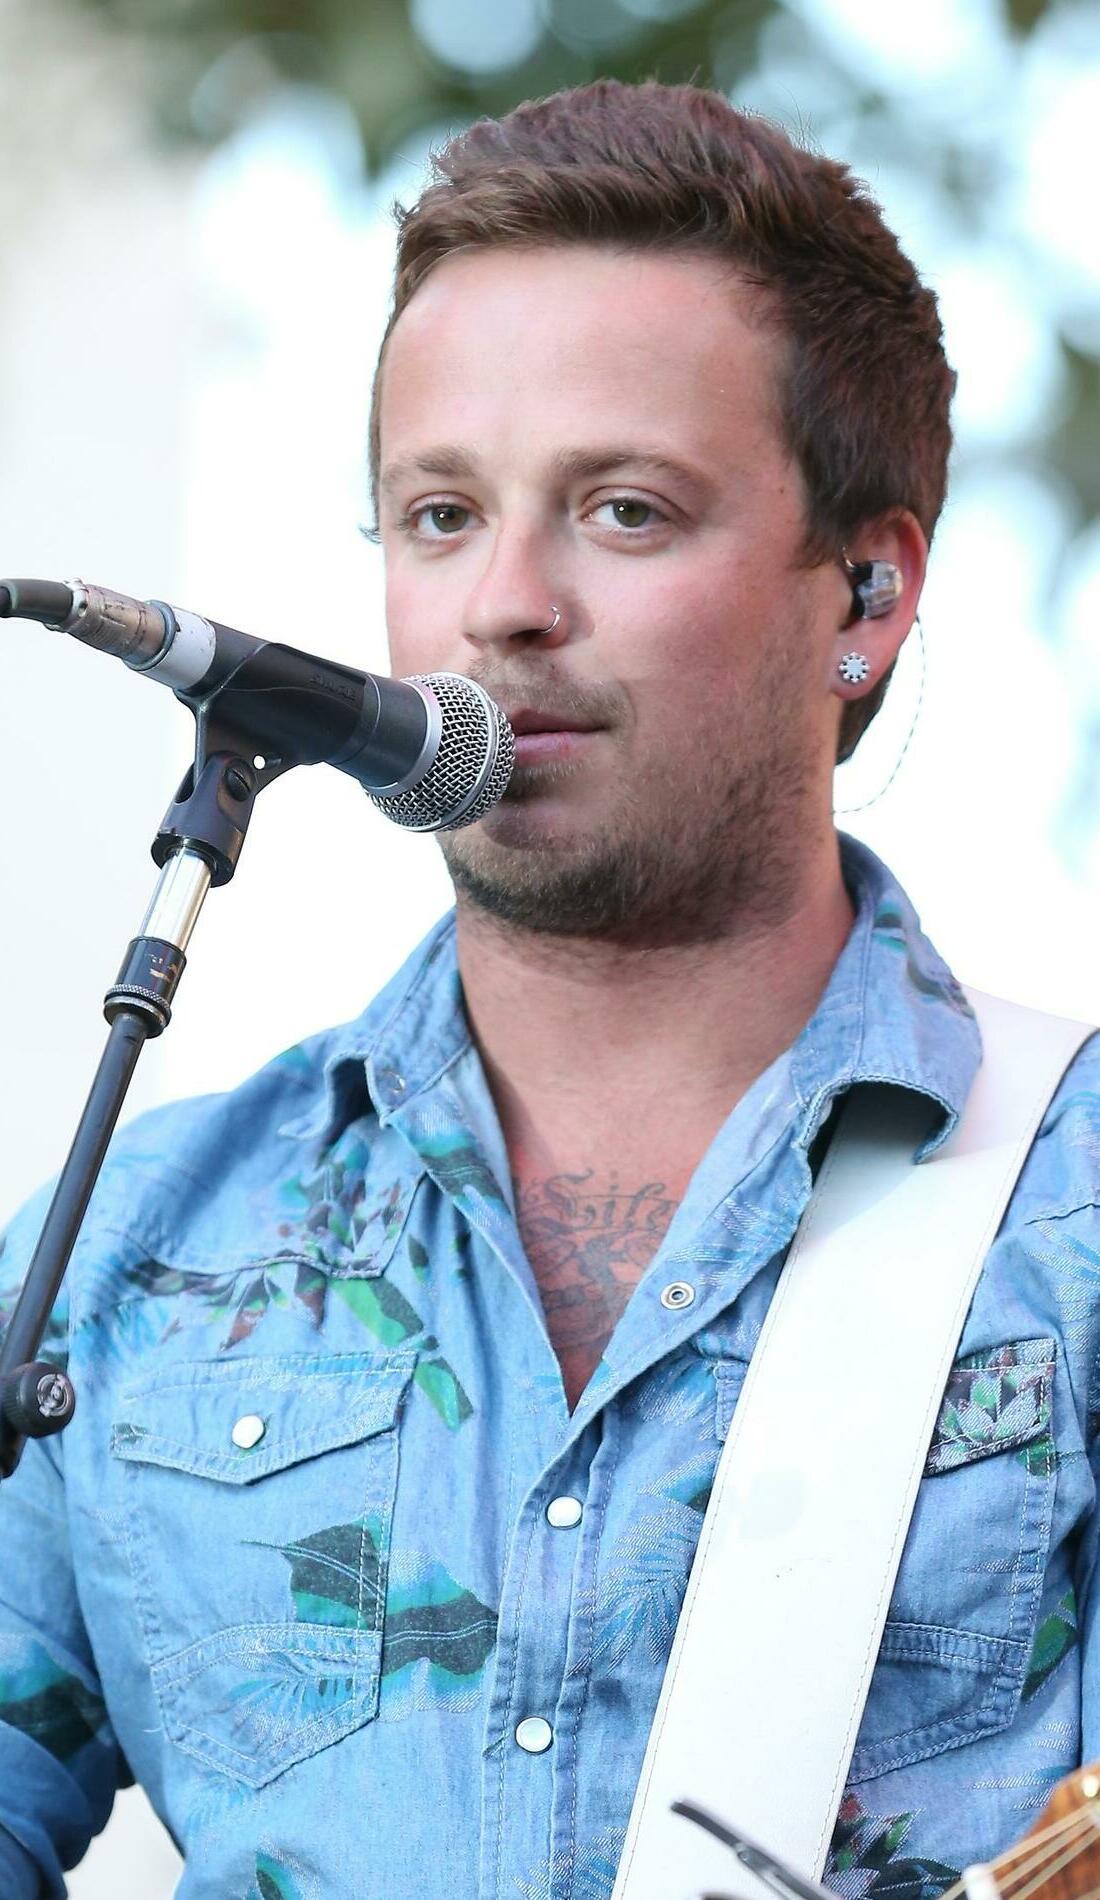 A Love and Theft live event